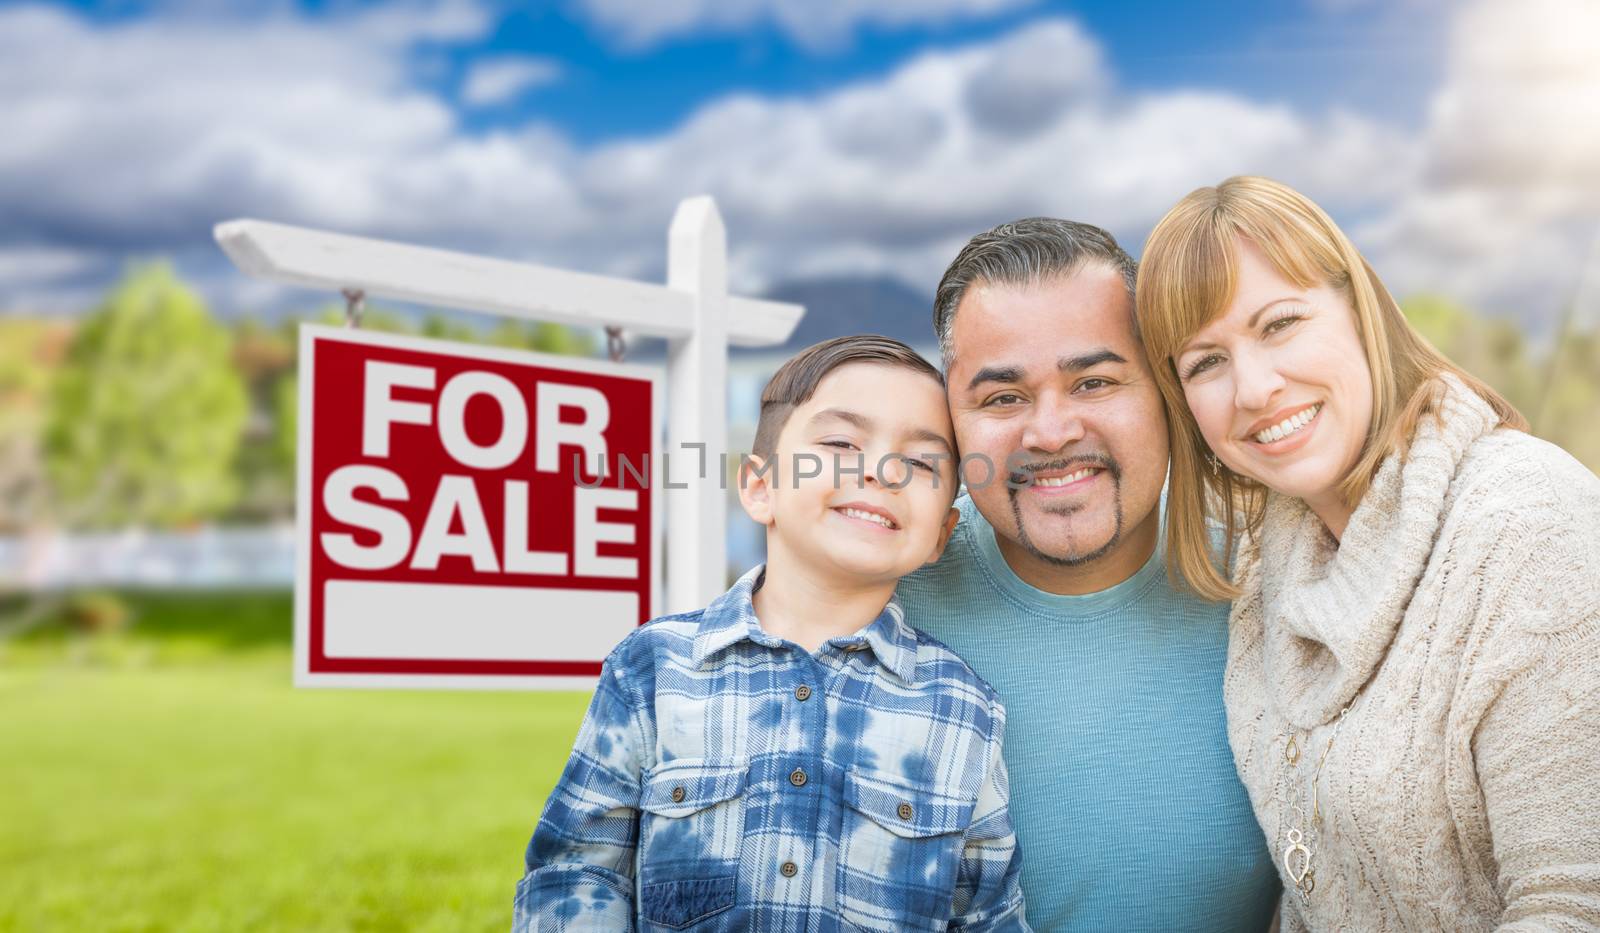 Mixed Race Family Portrait In Front of House and For Sale Real Estate Sign